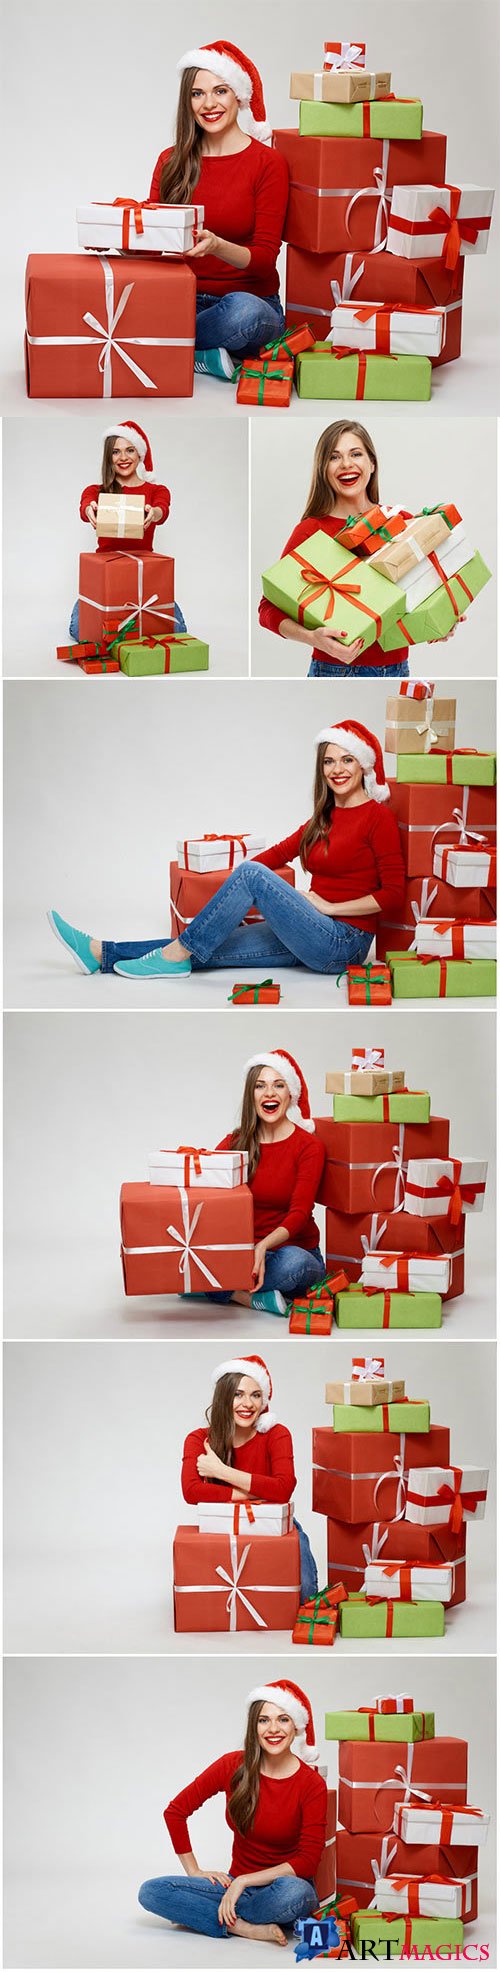 Girl near christmas boxes with gifts stock photo